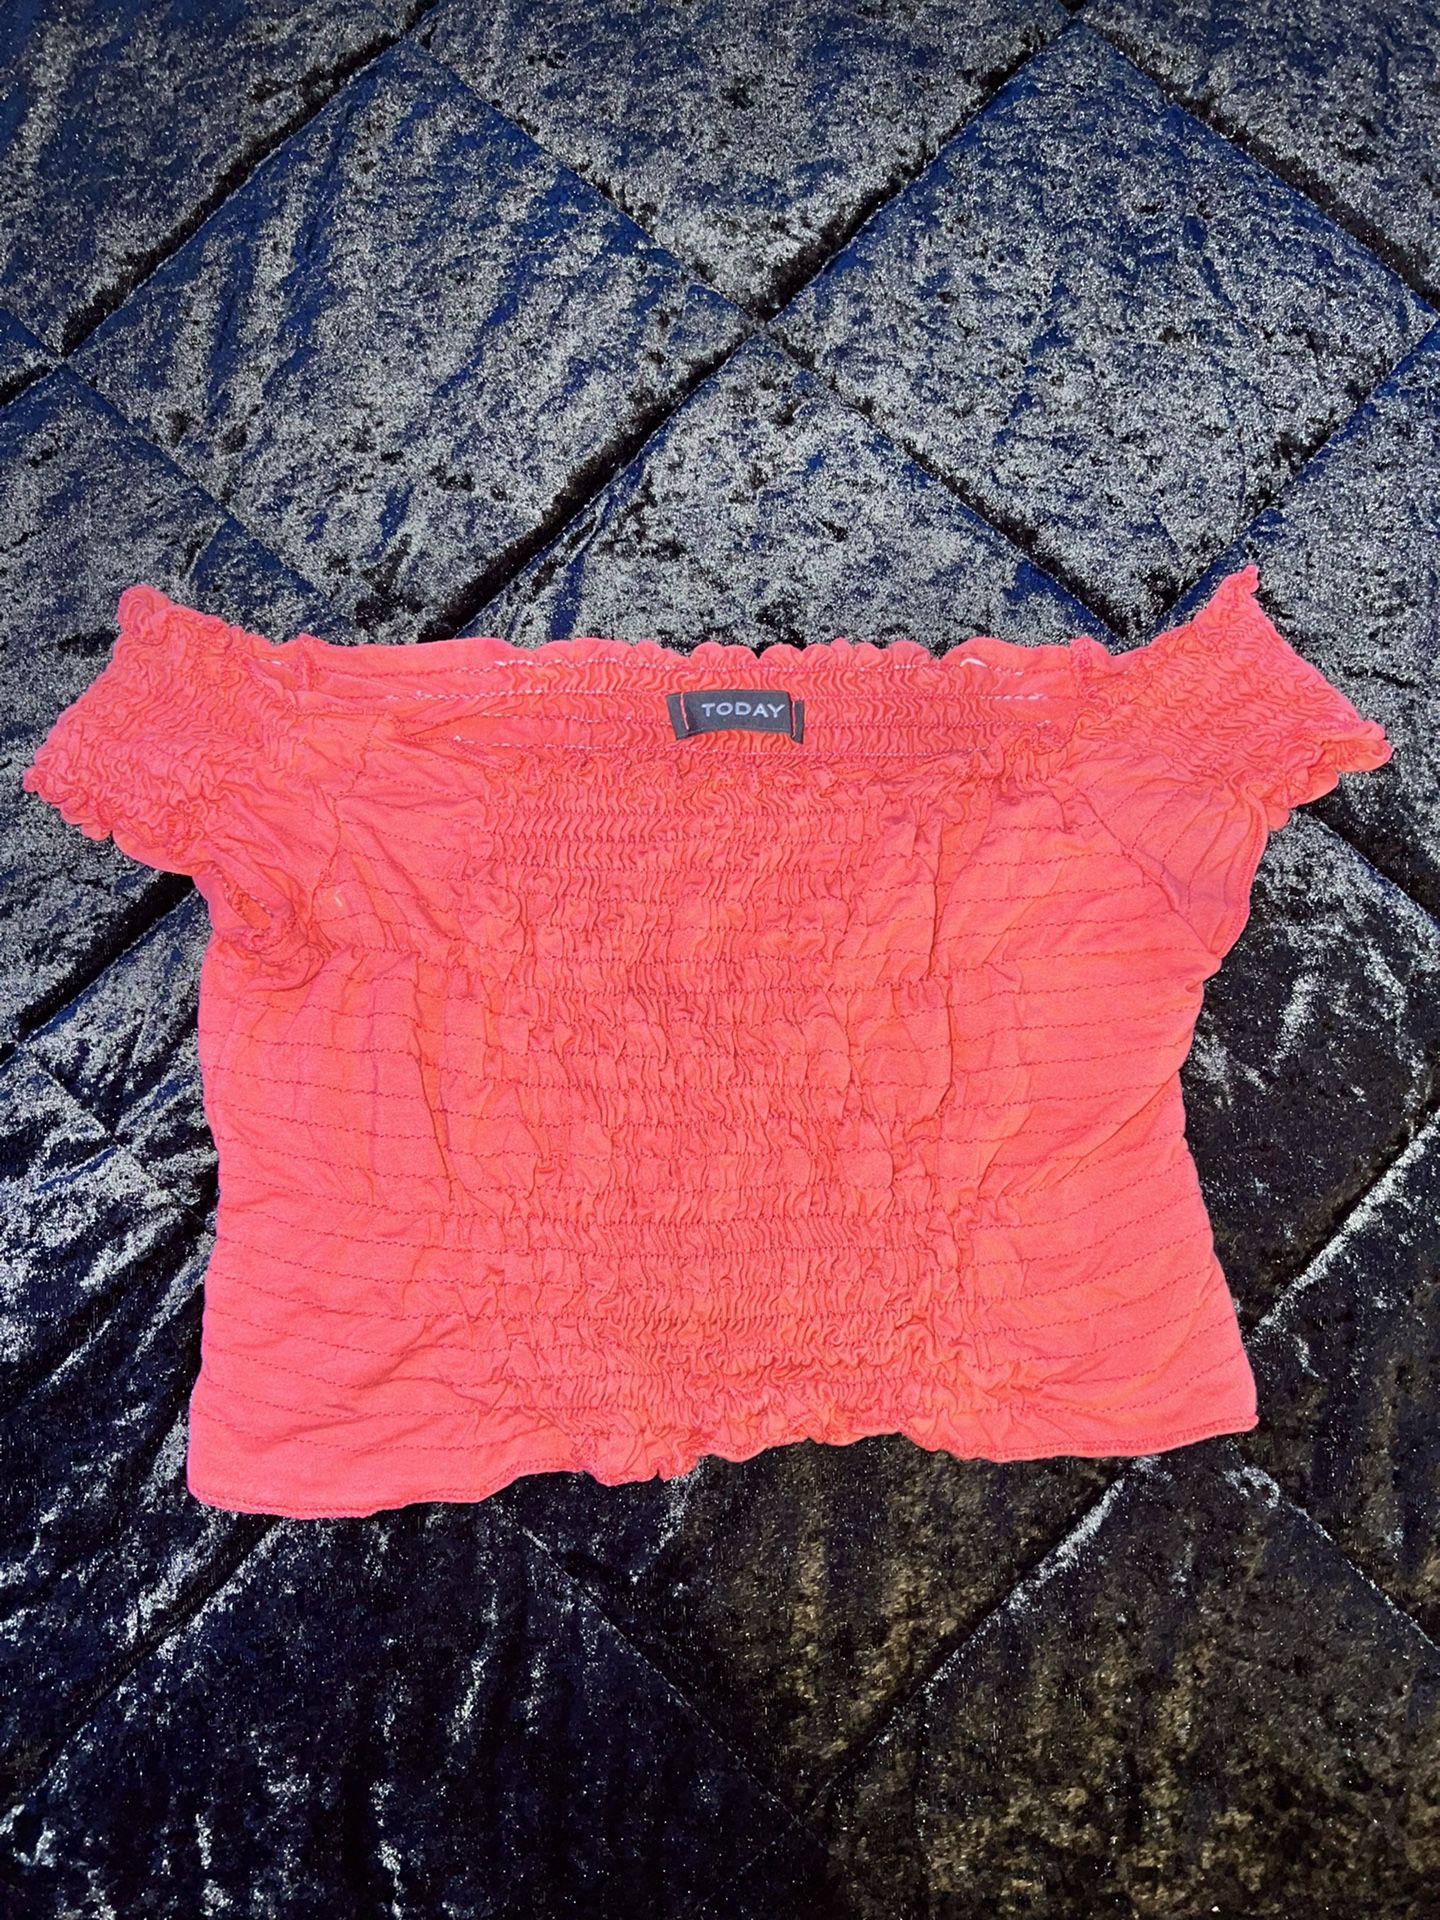 Today’s Salmon Pink Scrunched Off The Shoulder Crop Top